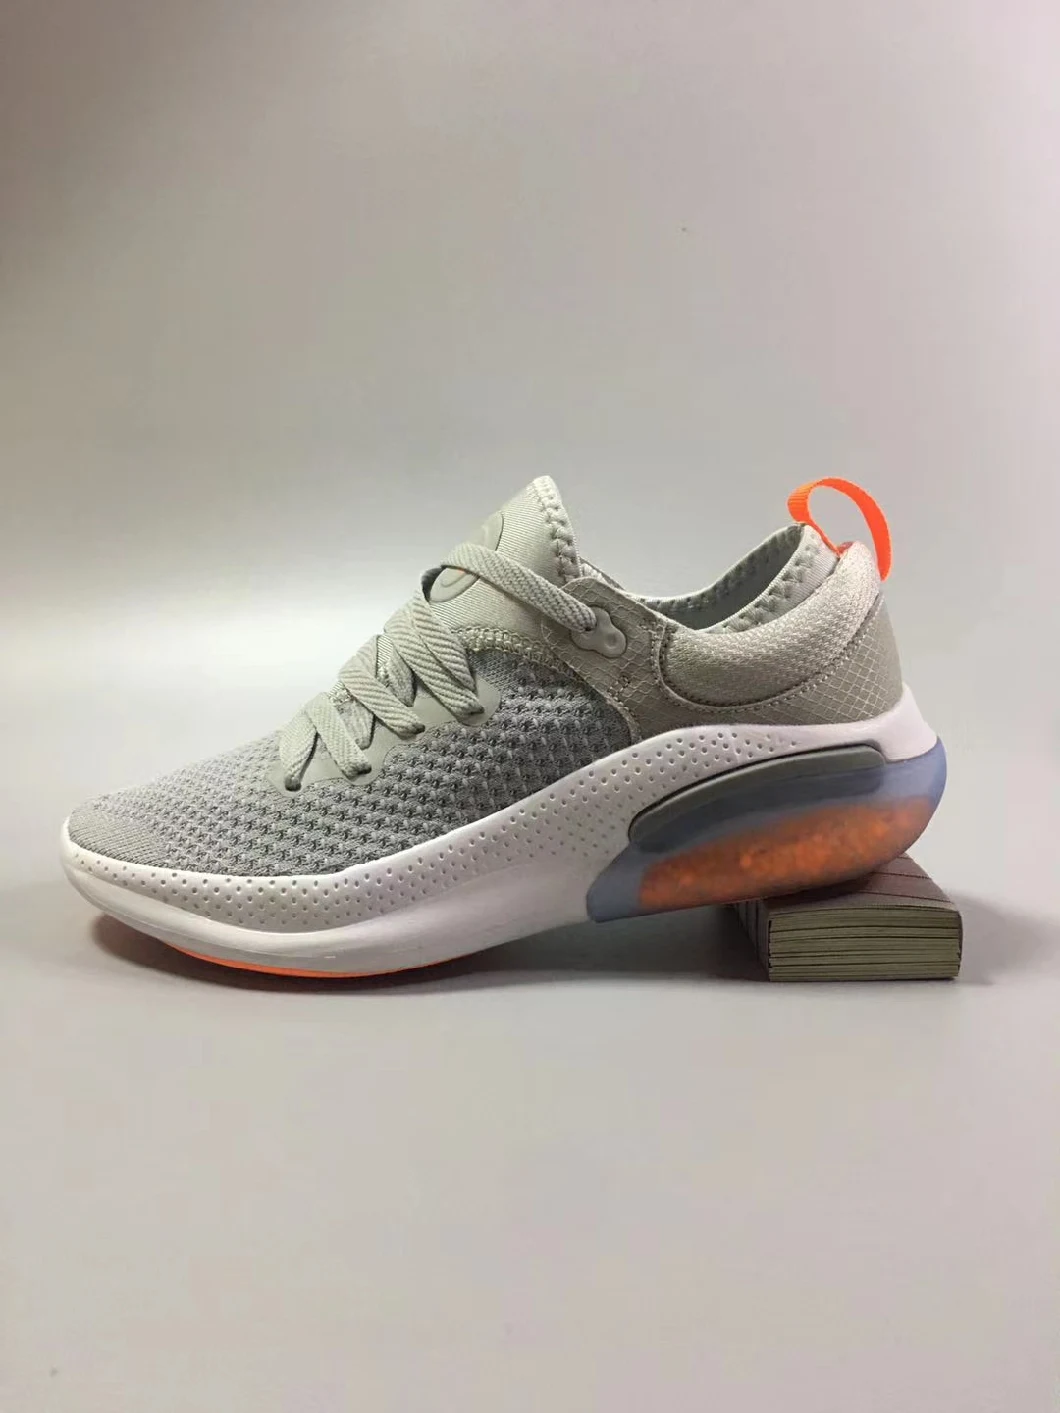 2022 Brand Men Running Casual Shoes Popular Leisure Shoes, Comfortable Athletic Women Sneaker Shoes, Low MOQ Stock Footwear New Style Fashion Sport Shoes